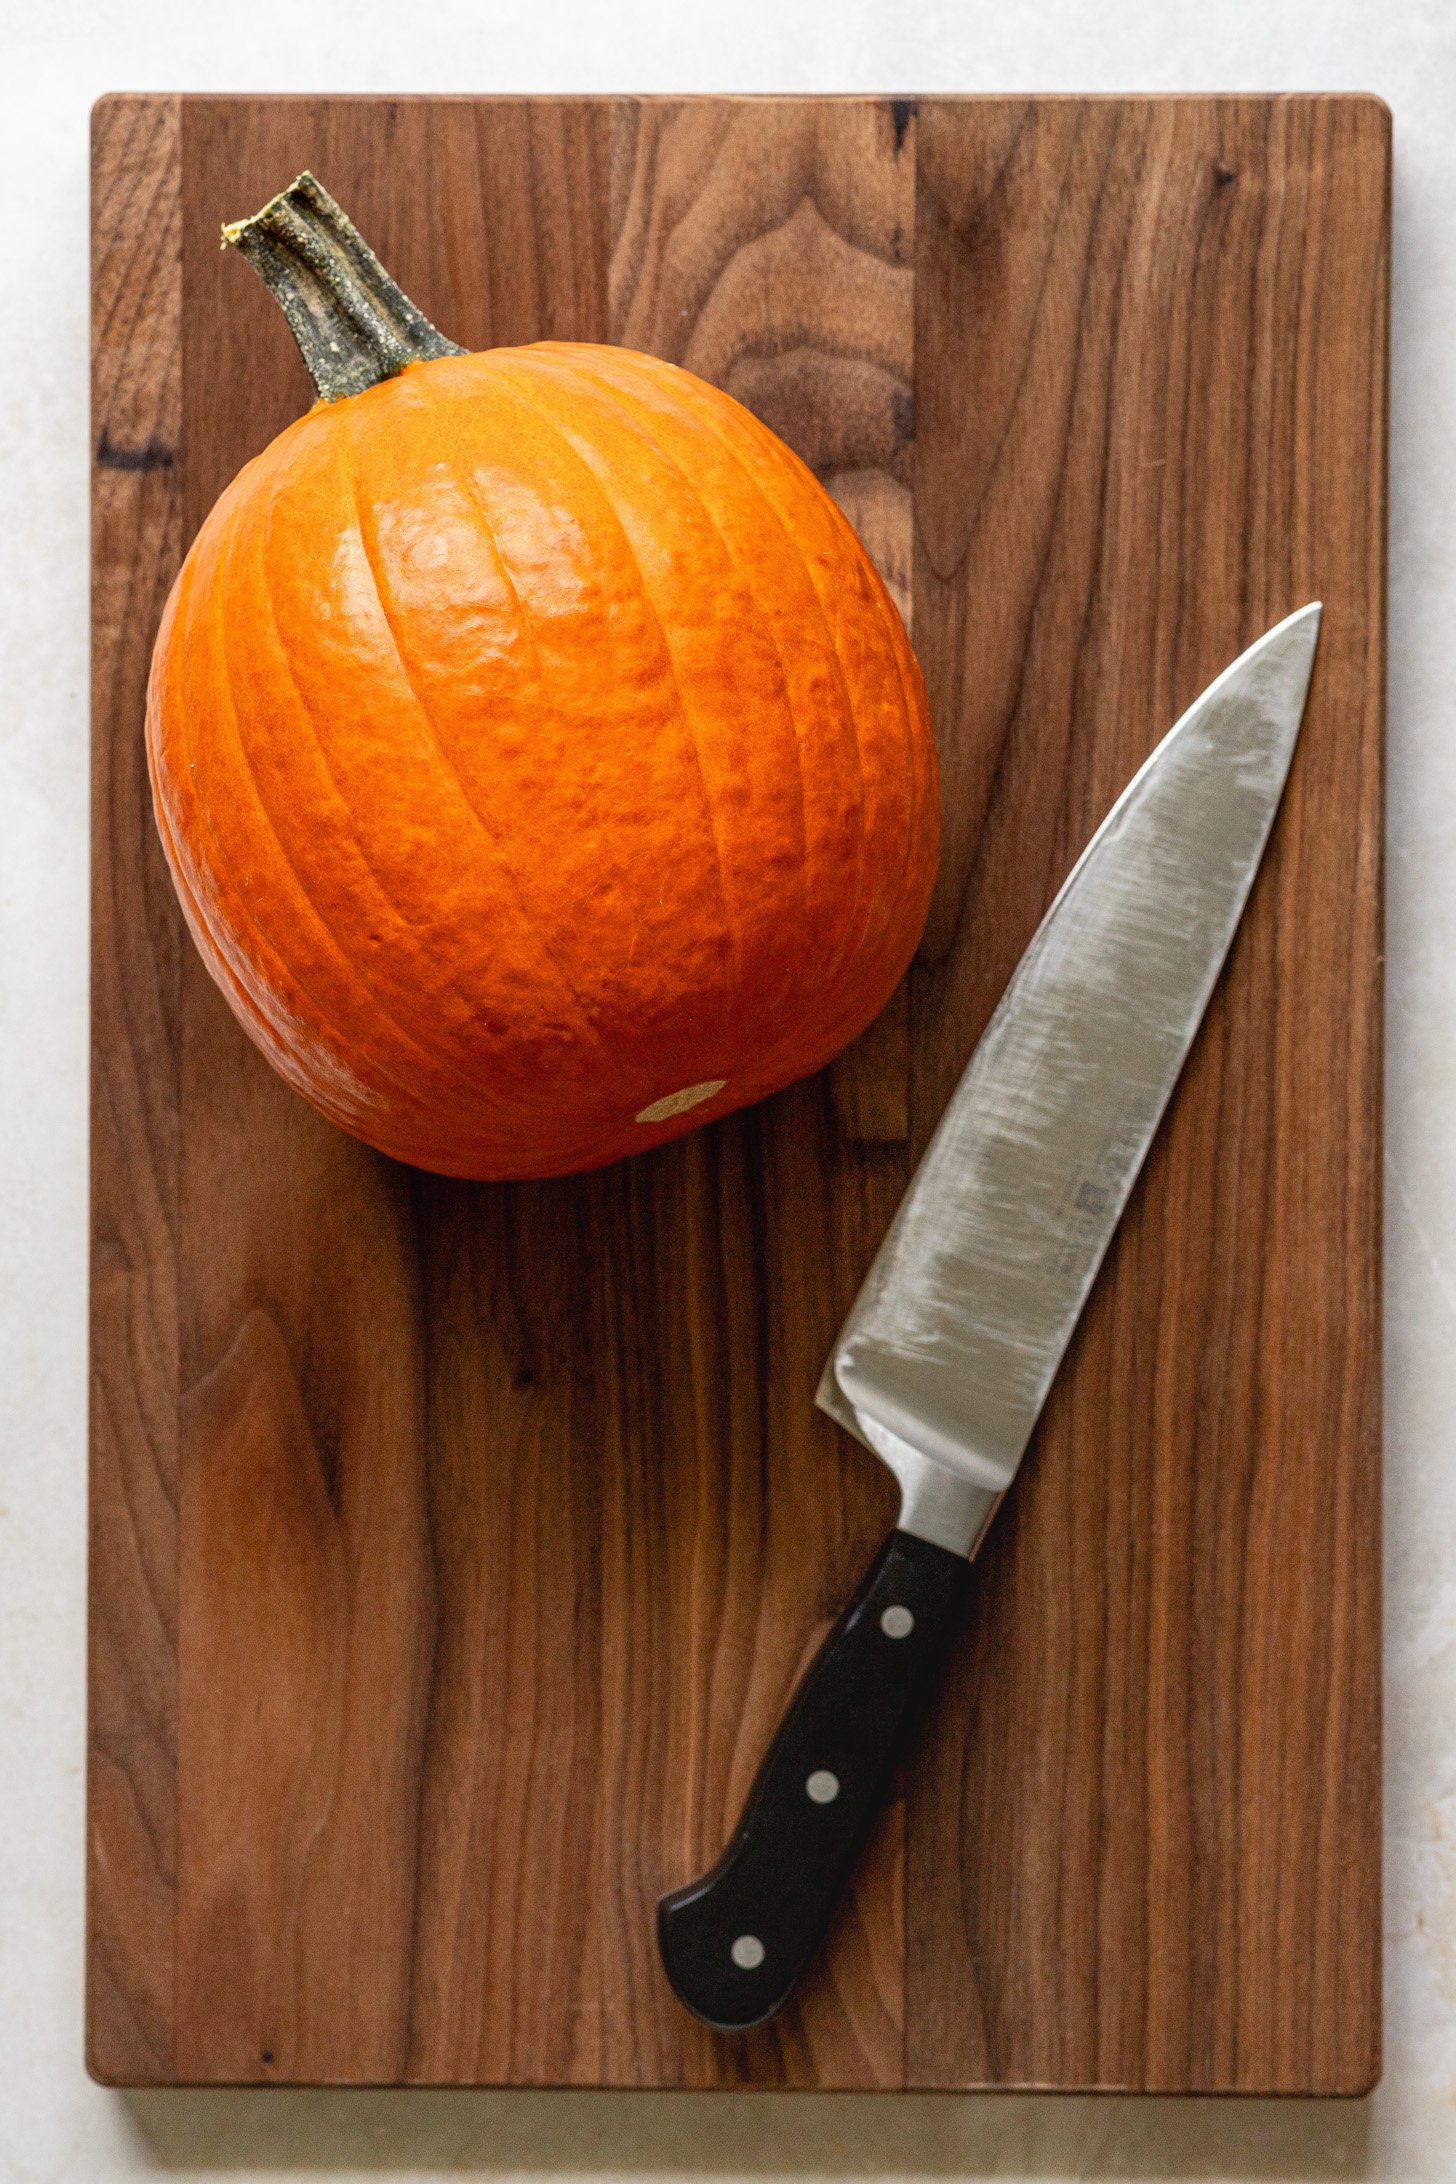 A small pumpkin and chef's knife sitting atop a wooden cutting board.